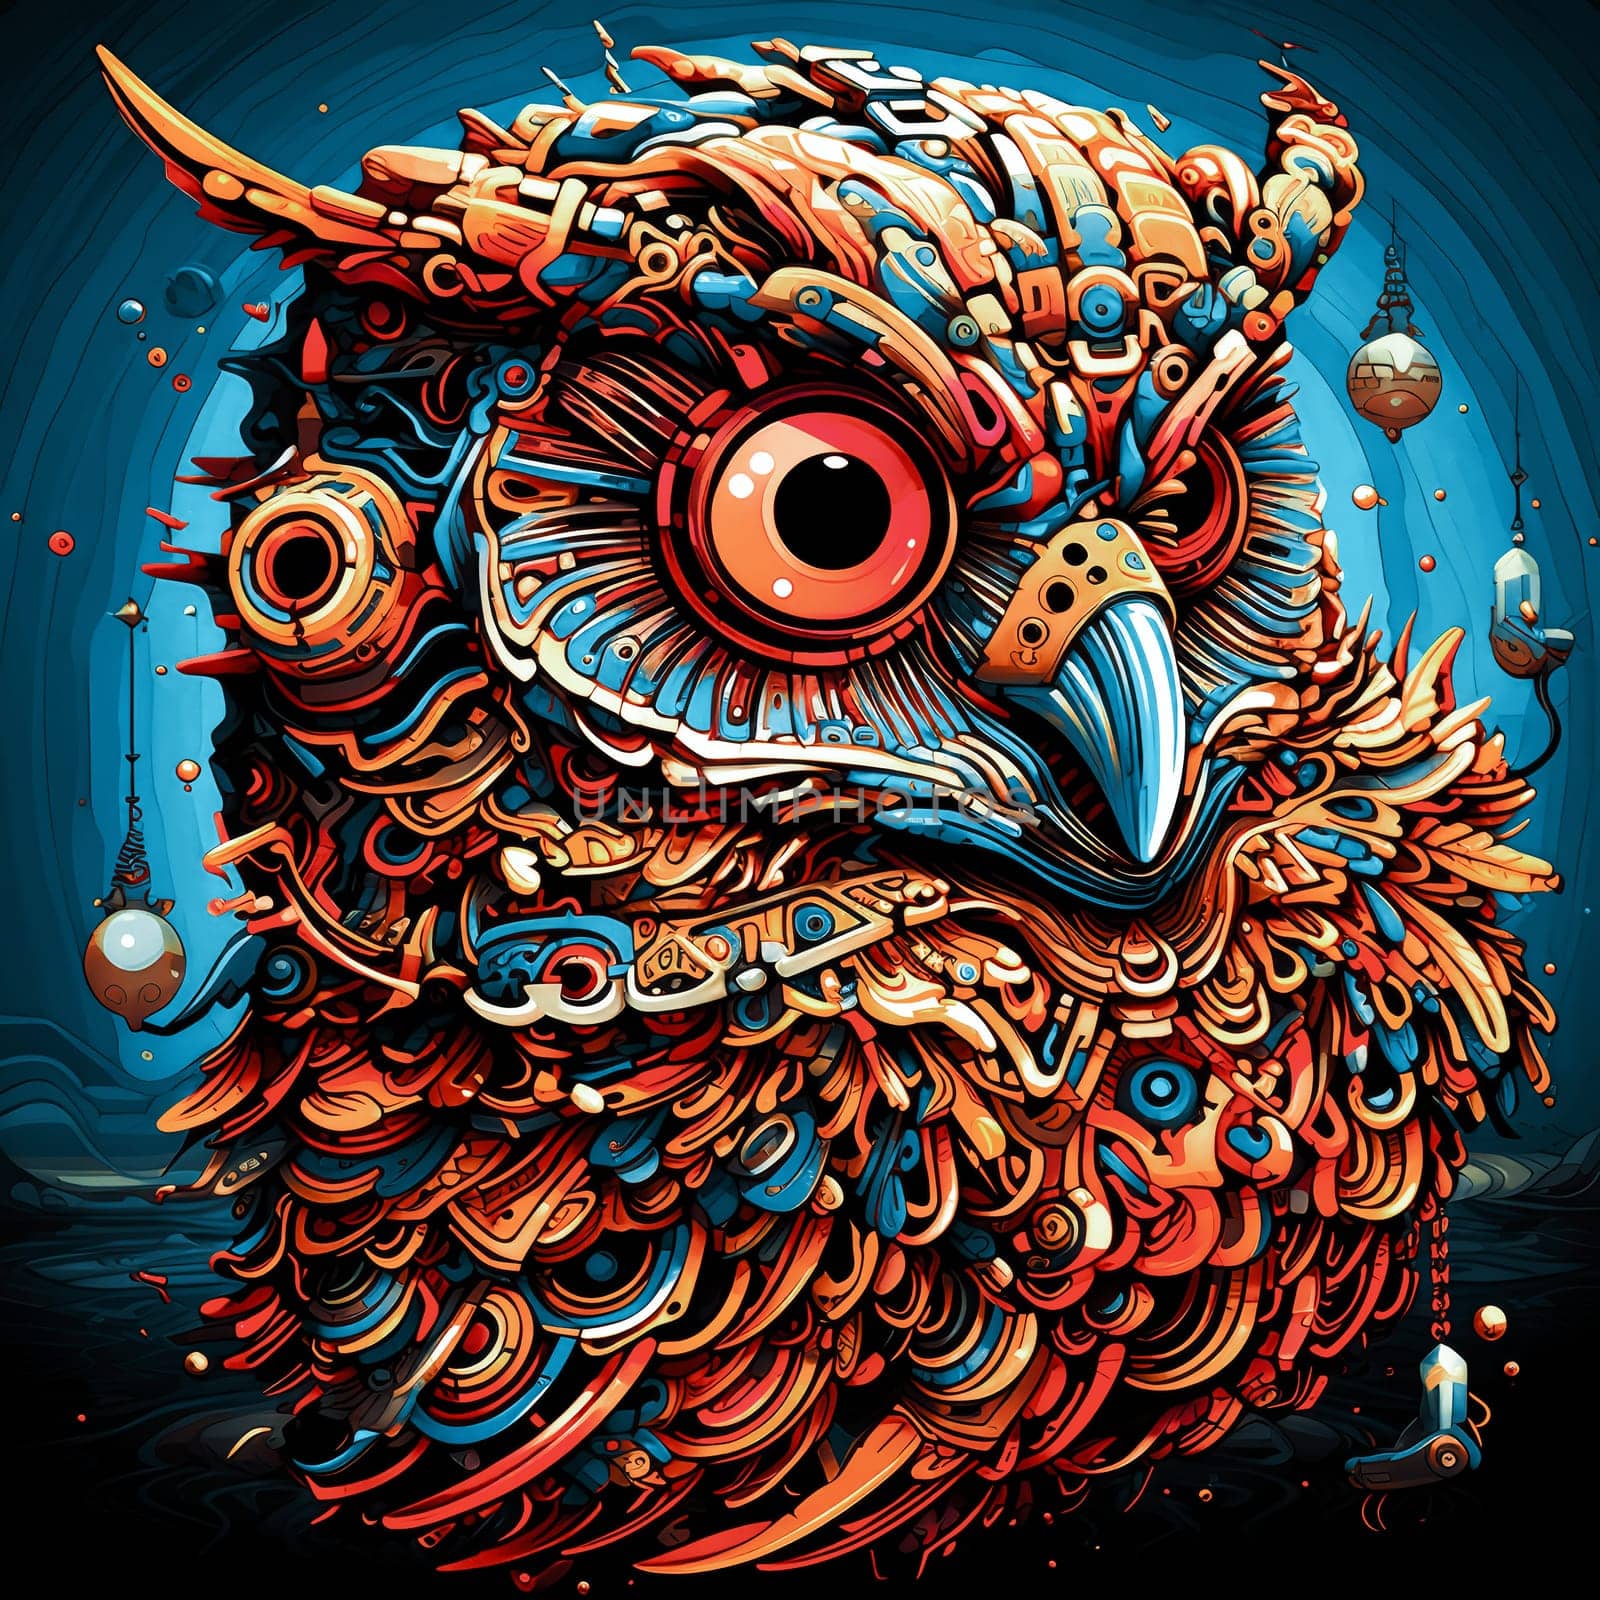 Abstract decorative owl portrait. by palinchak